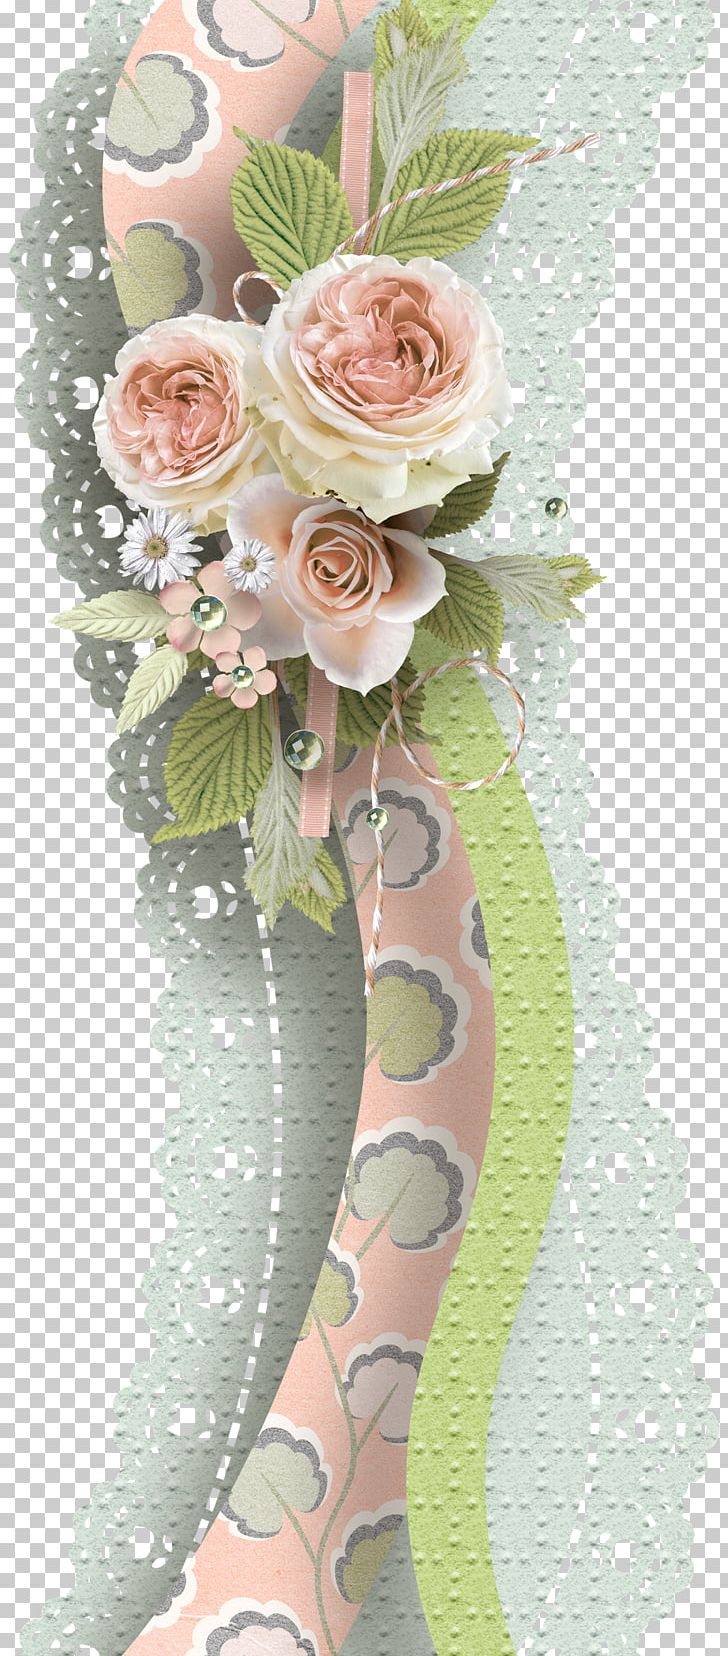 Paper Scrapbooking Flower Bouquet Embroidery PNG, Clipart, Art, Collage, Cut Flowers, Decorations, Digital Scrapbooking Free PNG Download